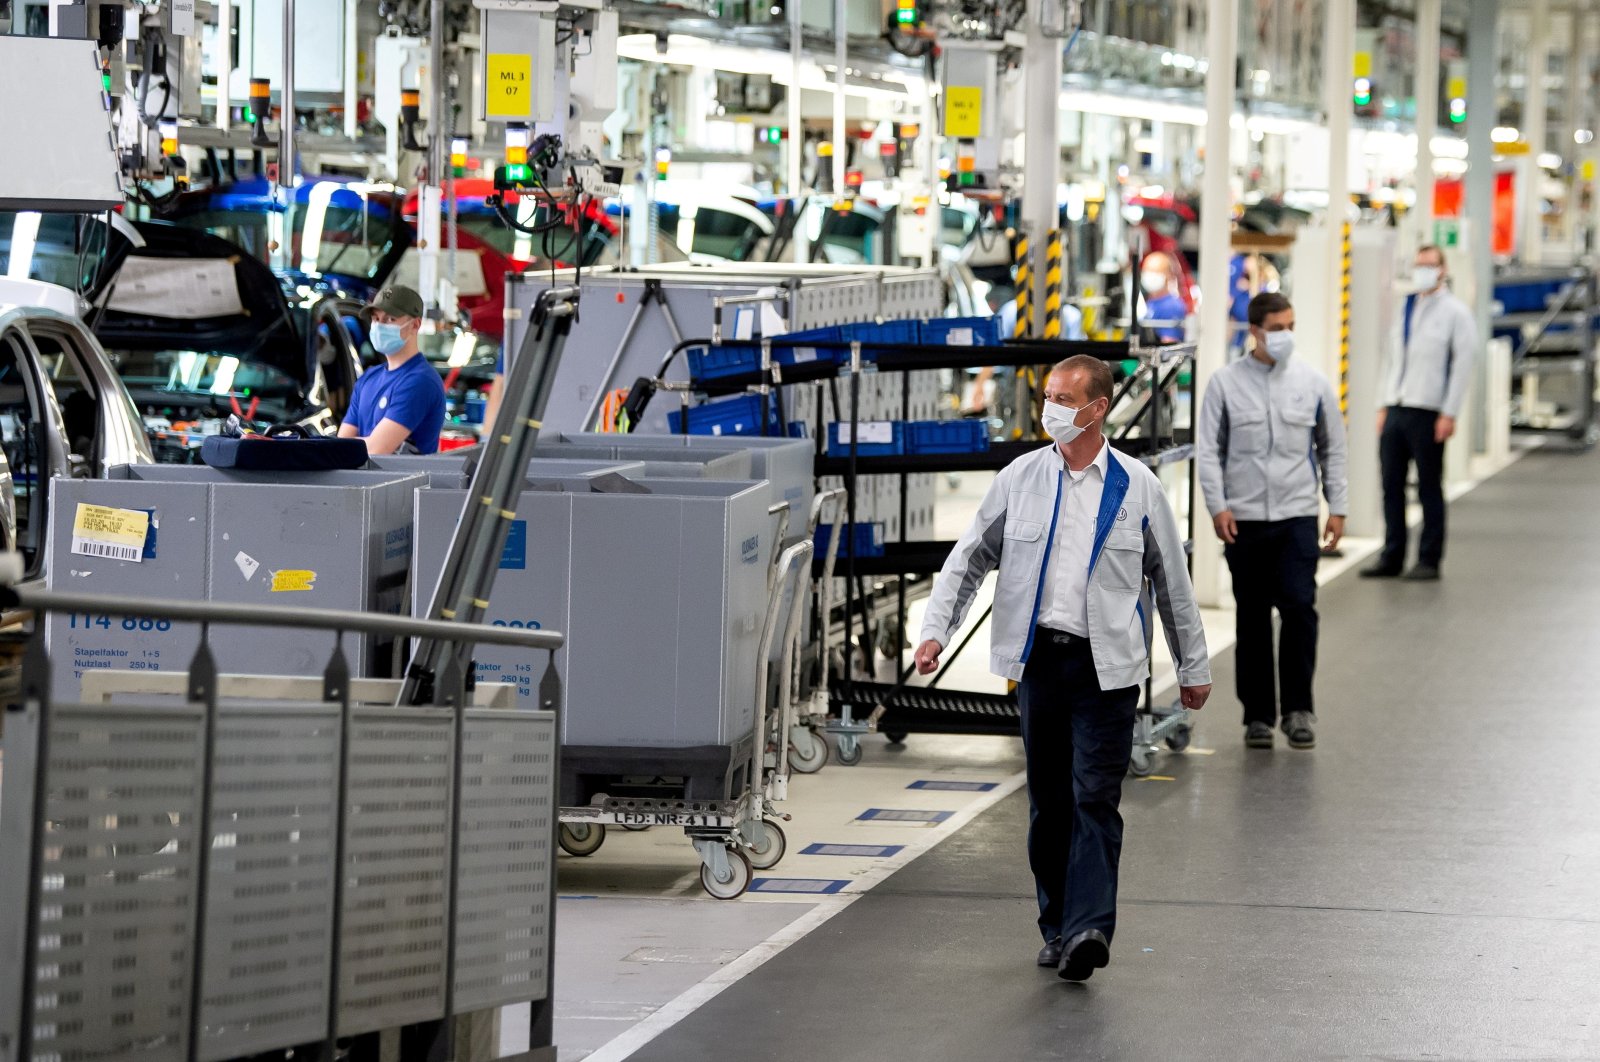 Staff at the Volkswagen assembly line in Wolfsburg, Germany, April 27, 2020. (Reuters Photo)